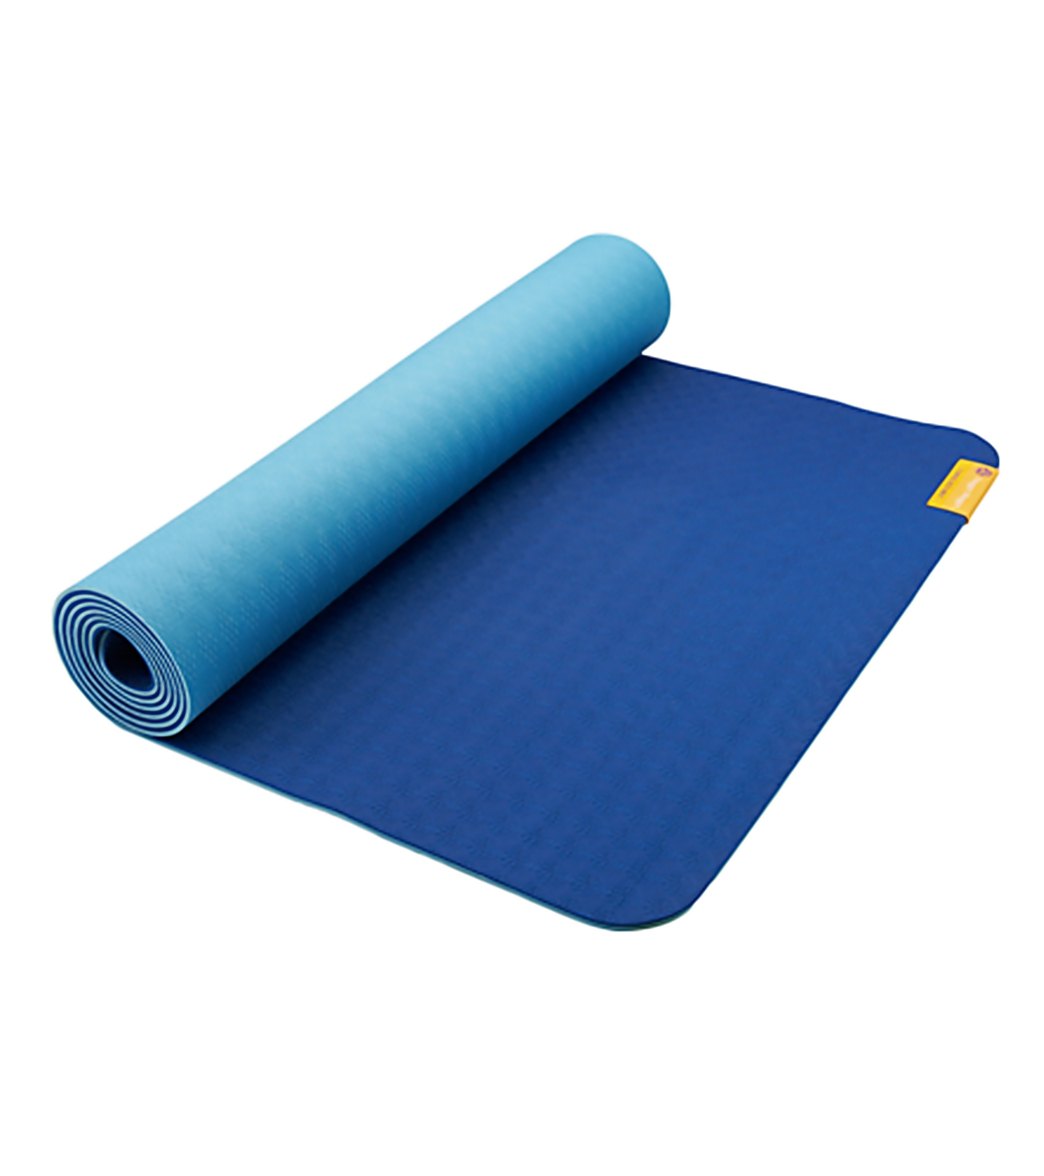 Hugger Mugger Para Rubber Yoga Mat - Natural Rubber, Great for Slippery  Hands and Feet, Dual Sided, Extra Cushion, Yoga Teacher Favorite